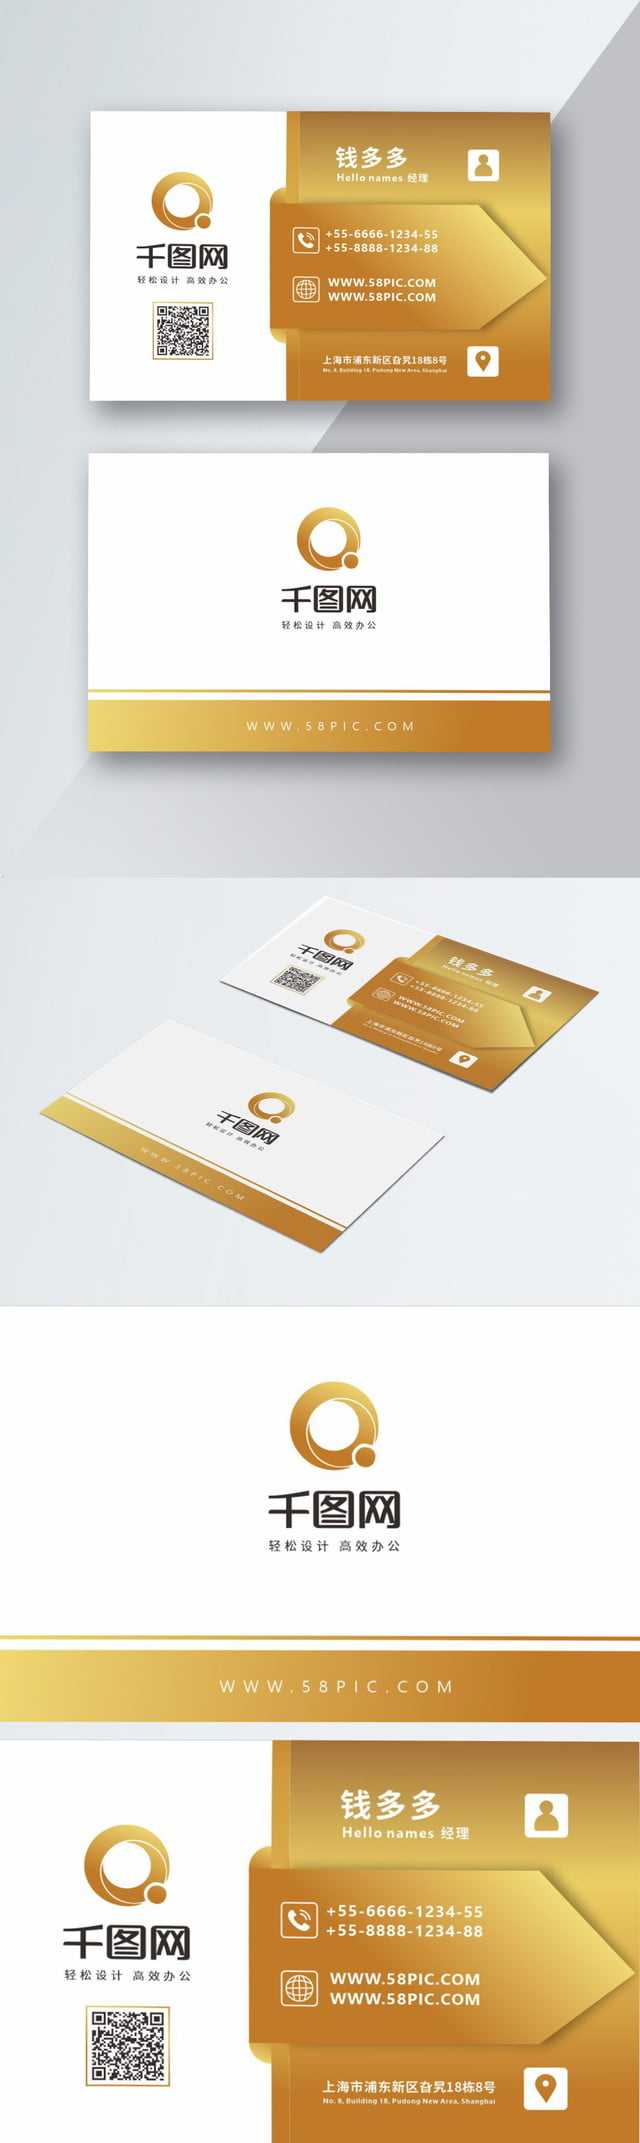 Hotel Business Card Vector Material Hotel Business Card Throughout Download Visiting Card Templates